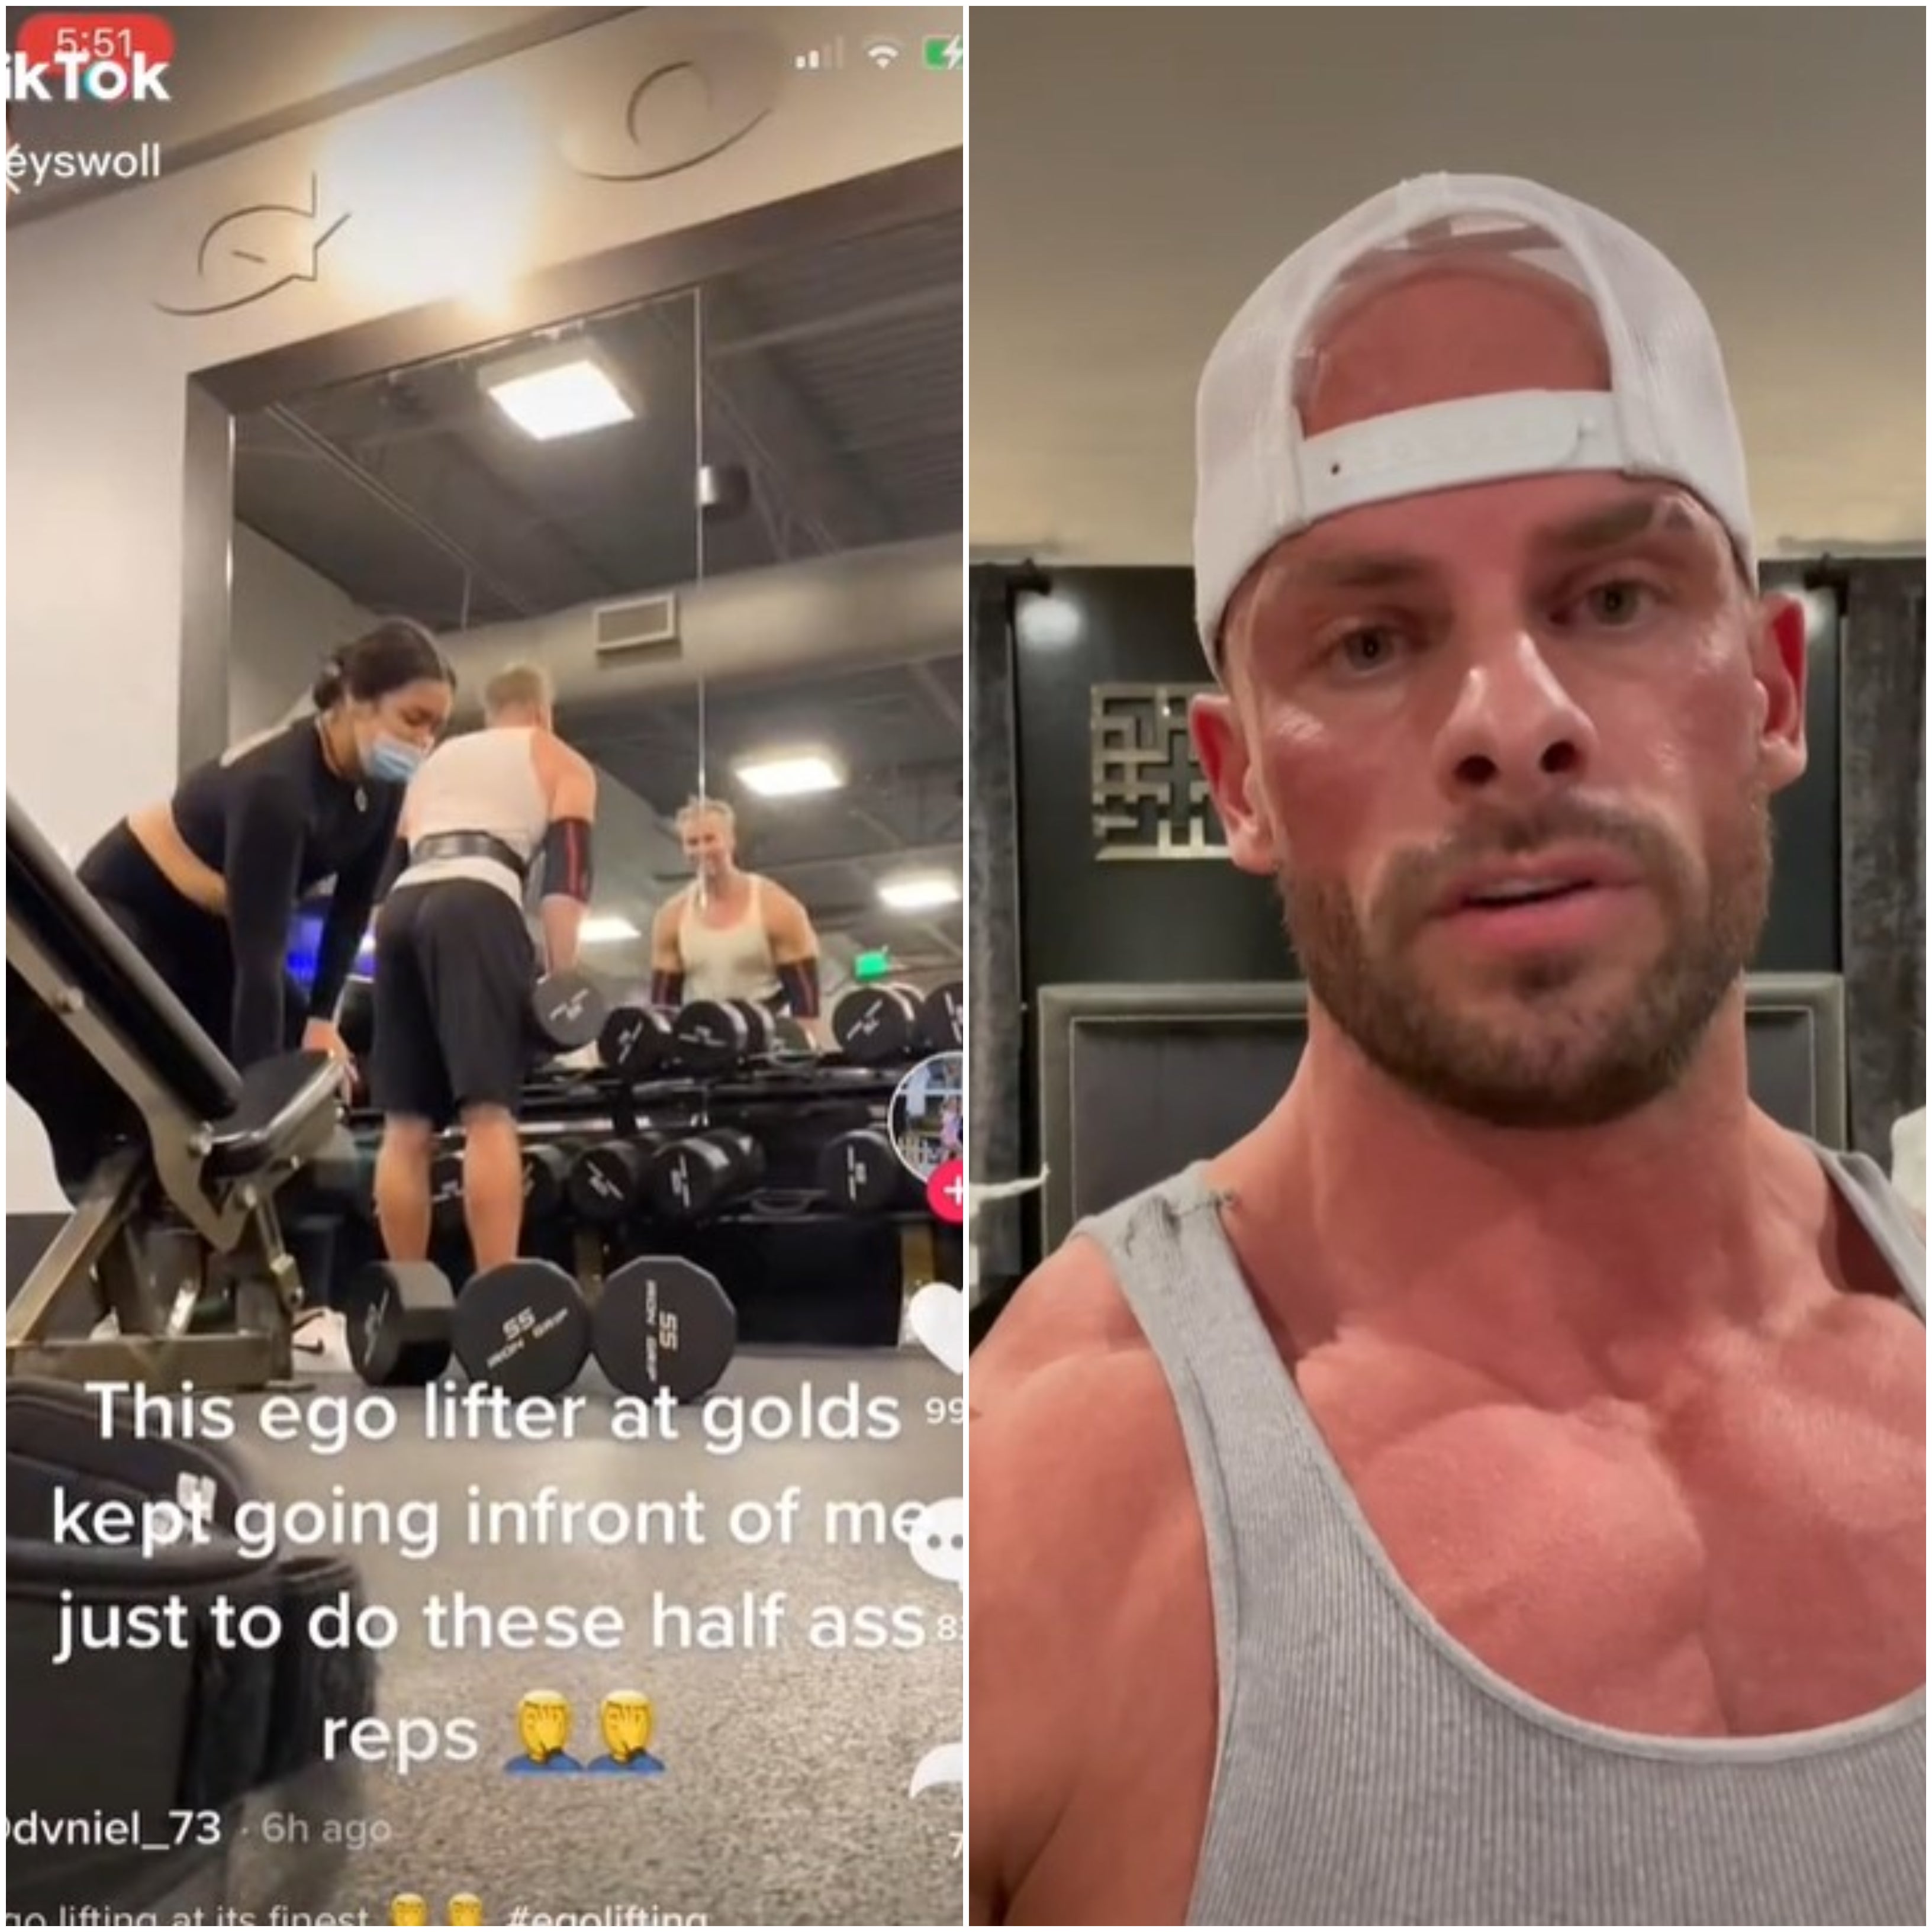 Personal trainer Joey Swoll says the man is completing a set of ‘partials’